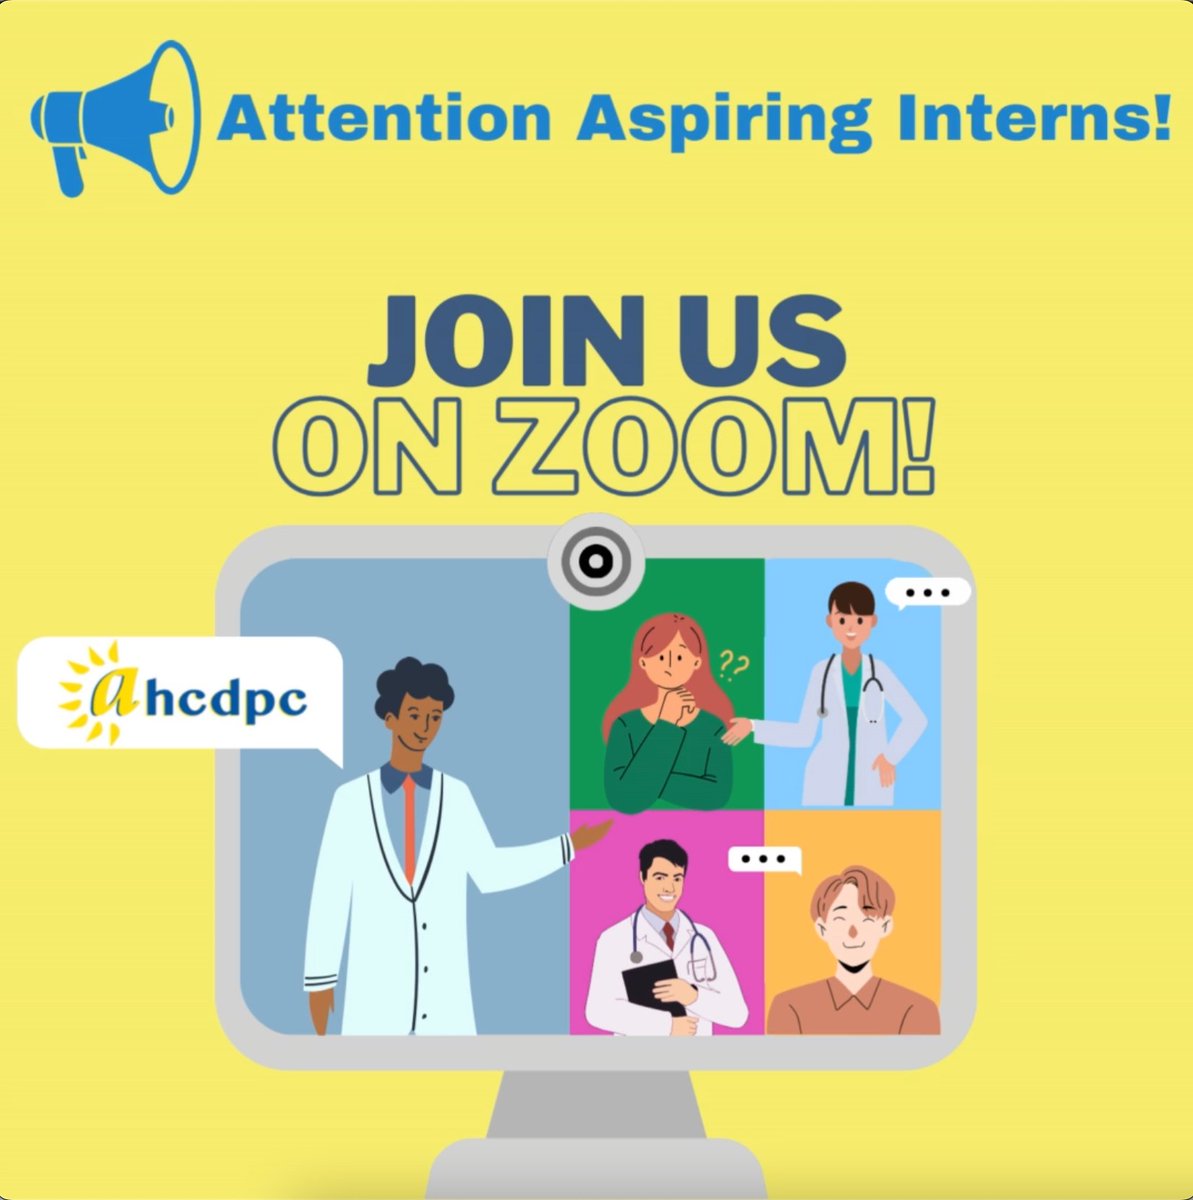 🌟 Florida & Georgia Interns! 🚀 Join us, Advocates for Healthcare we're offering PAID internships in various roles like social media, administration, patient advocacy, and more! Sign up for a meeting to learn more! 💼 ahcdpc.com/stay-in-the-kn…
#Paidinternship #Healthcare #Florida